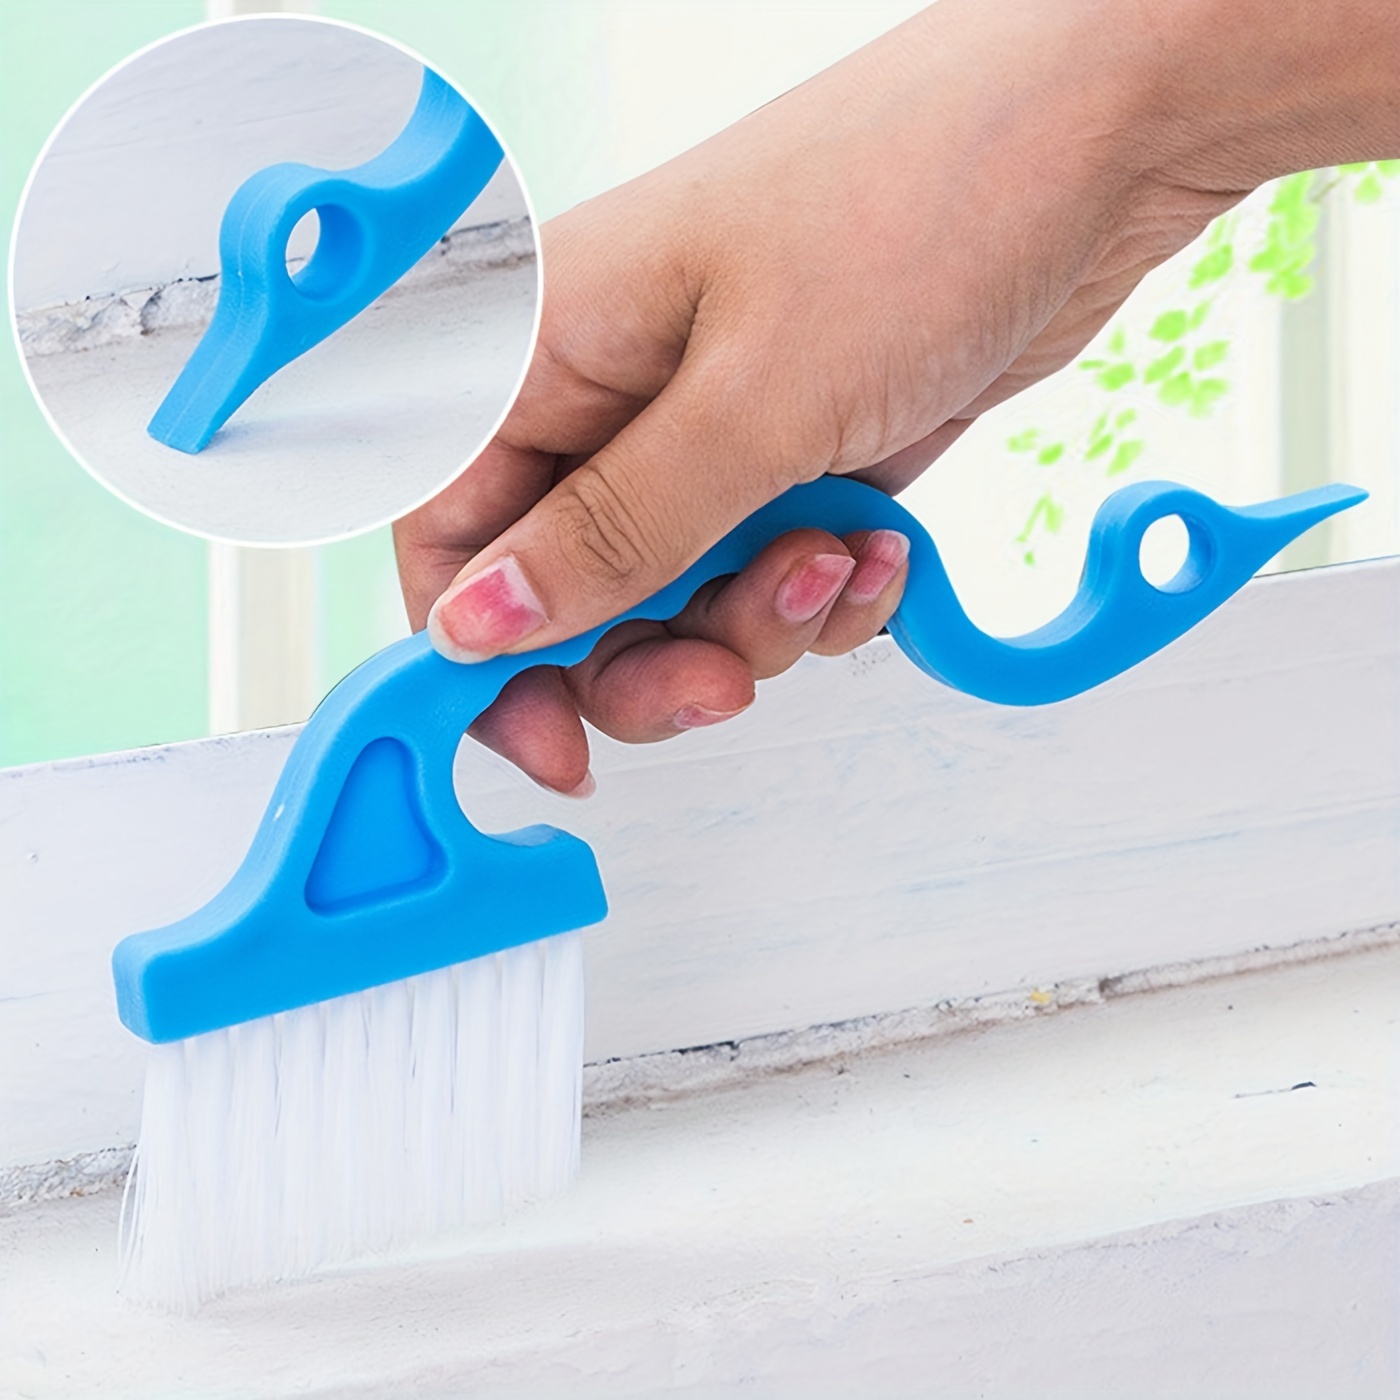 Gap Cleaning Brush, 2023 New Multifunctional Gap Brush Crevice Gap Cleaning  Brush Tool, Window Track Cleaning Brushes Hand-held Groove Cleaning